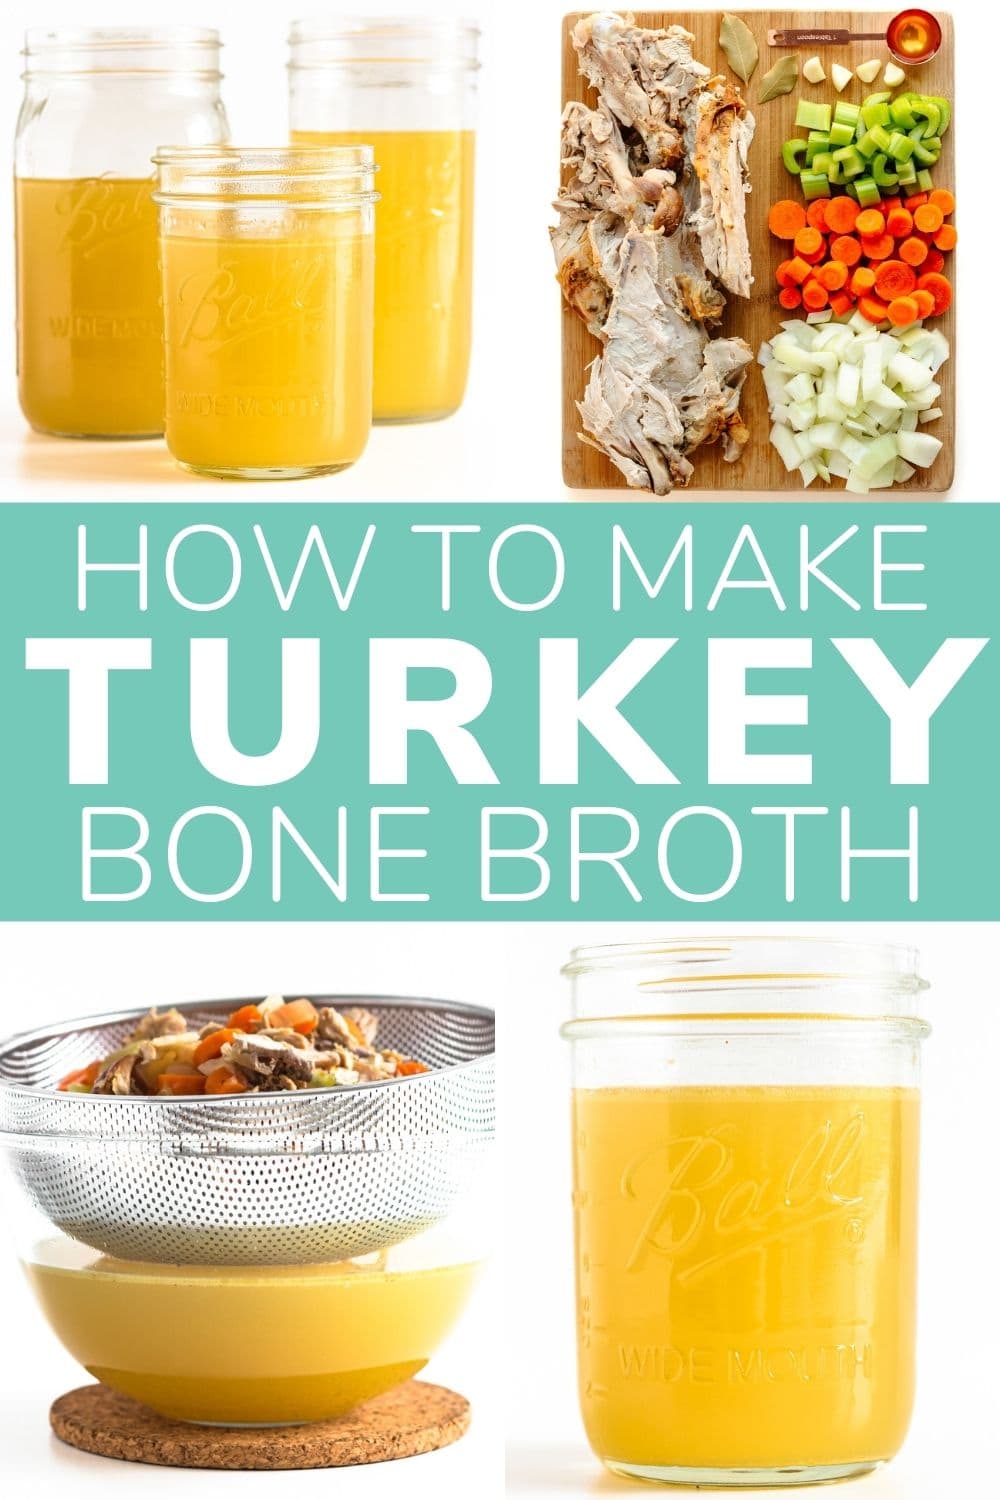 Pinterest photo collage graphic with text overlay "How To Make Turkey Bone Broth"